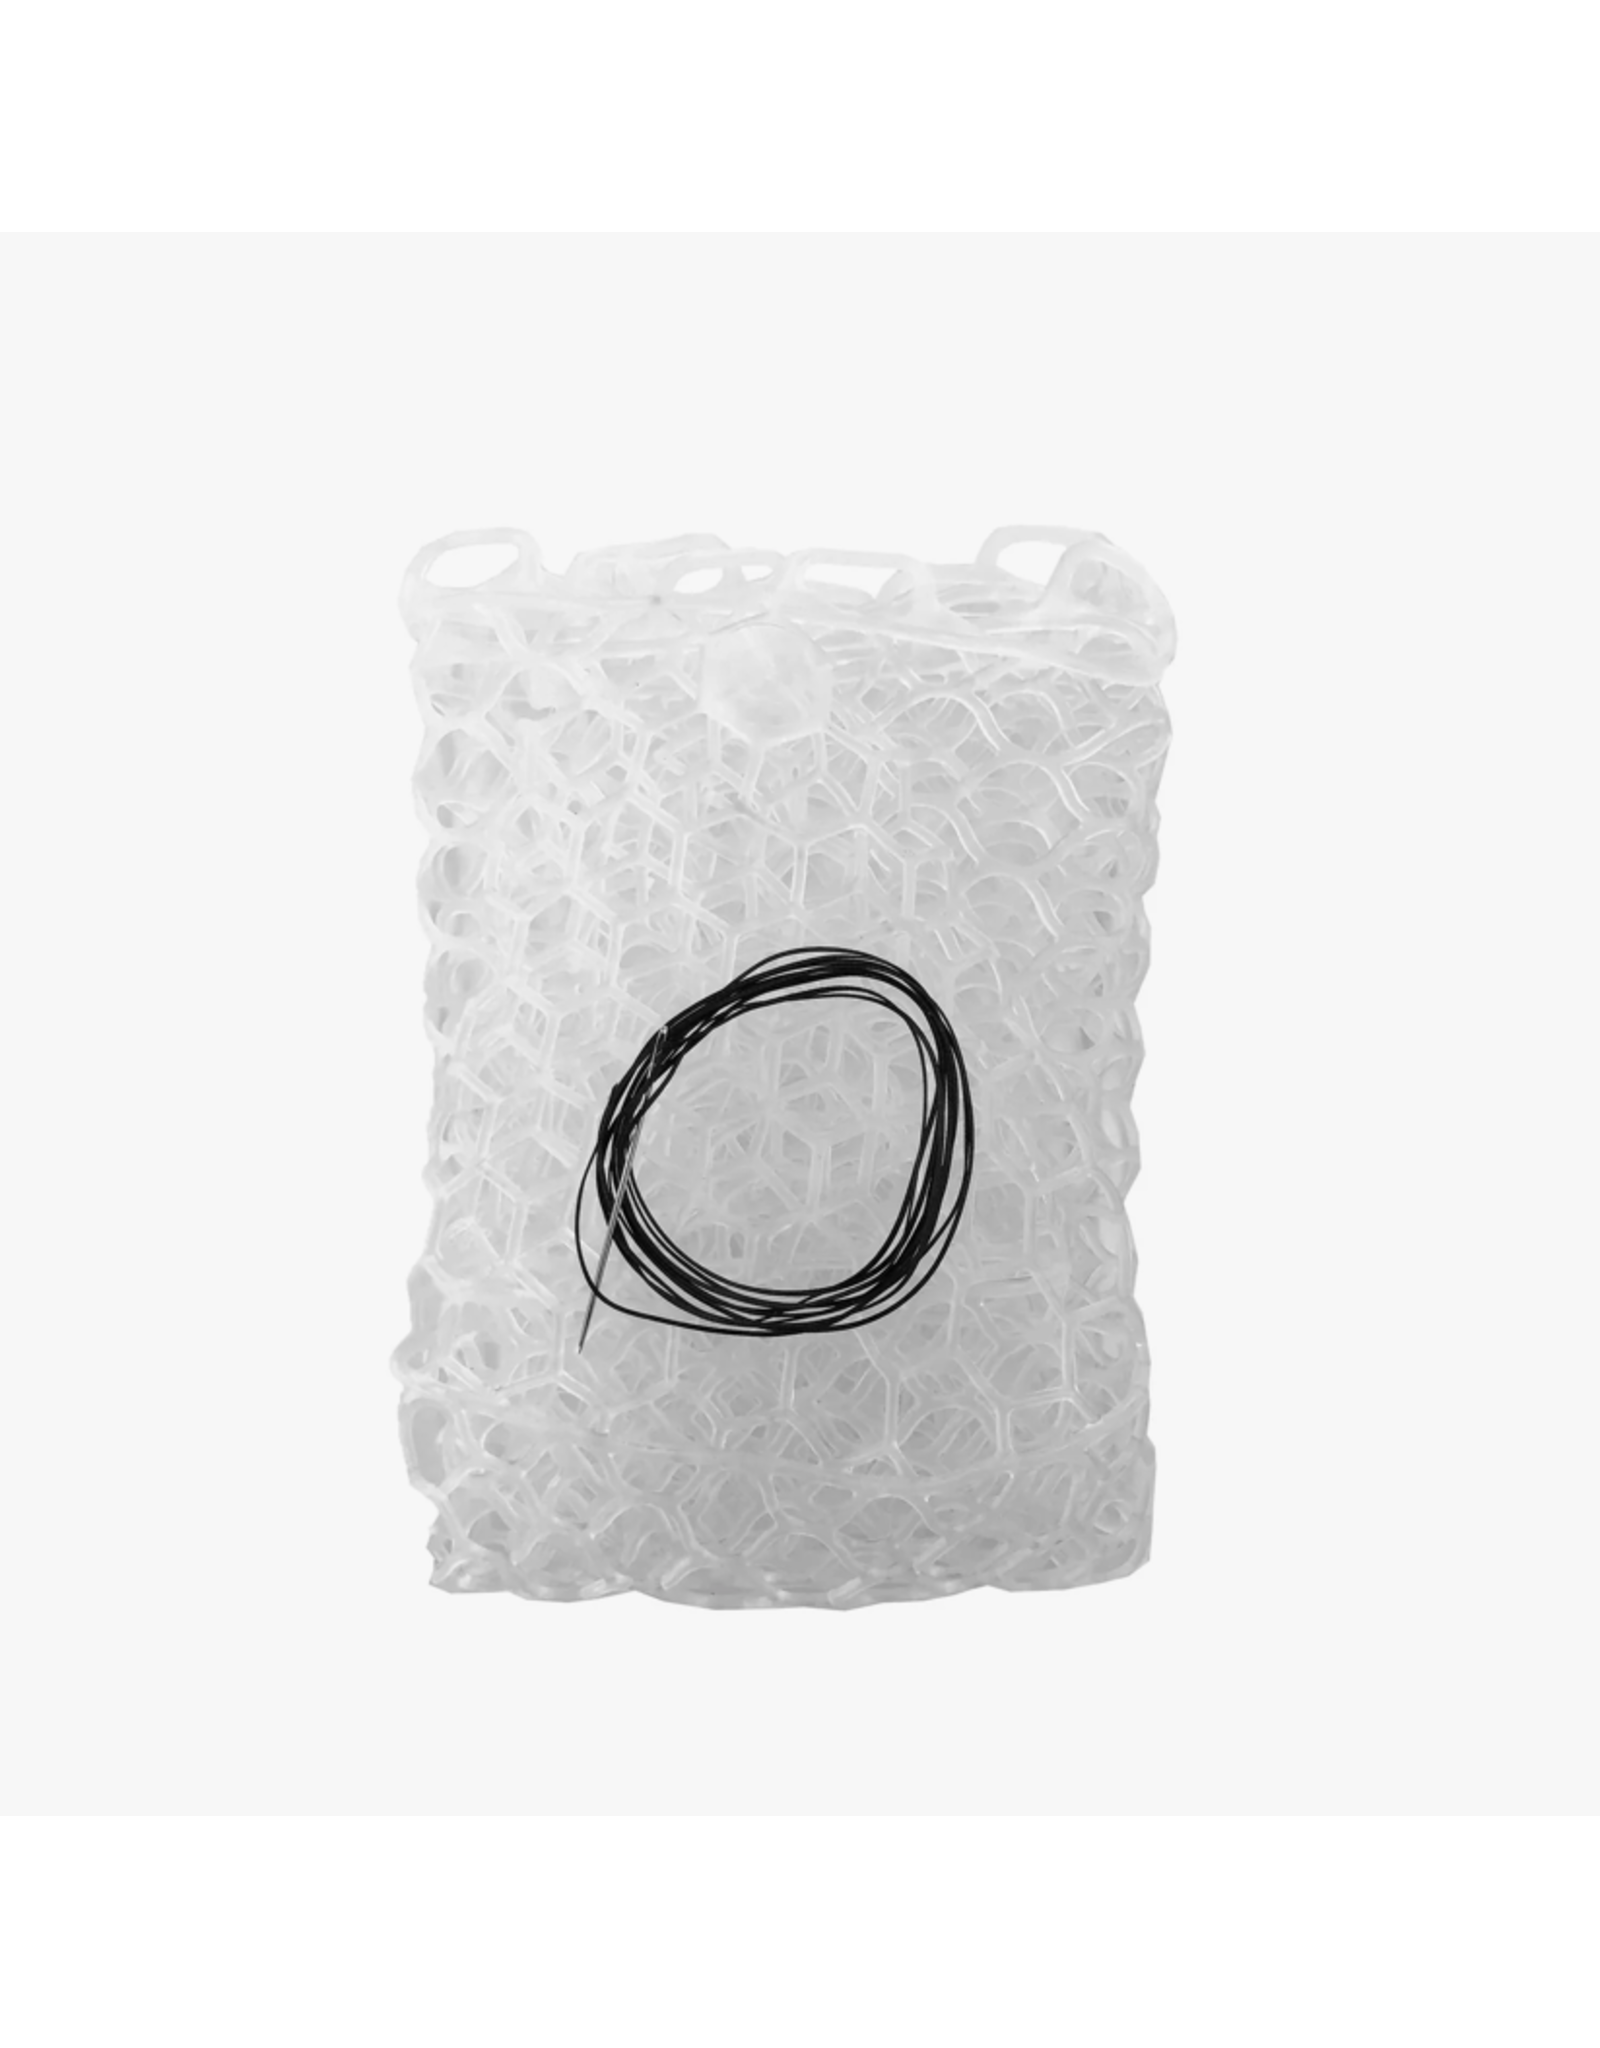 Fishpond Fishpond - Nomad Replacement Rubber Net - 15"